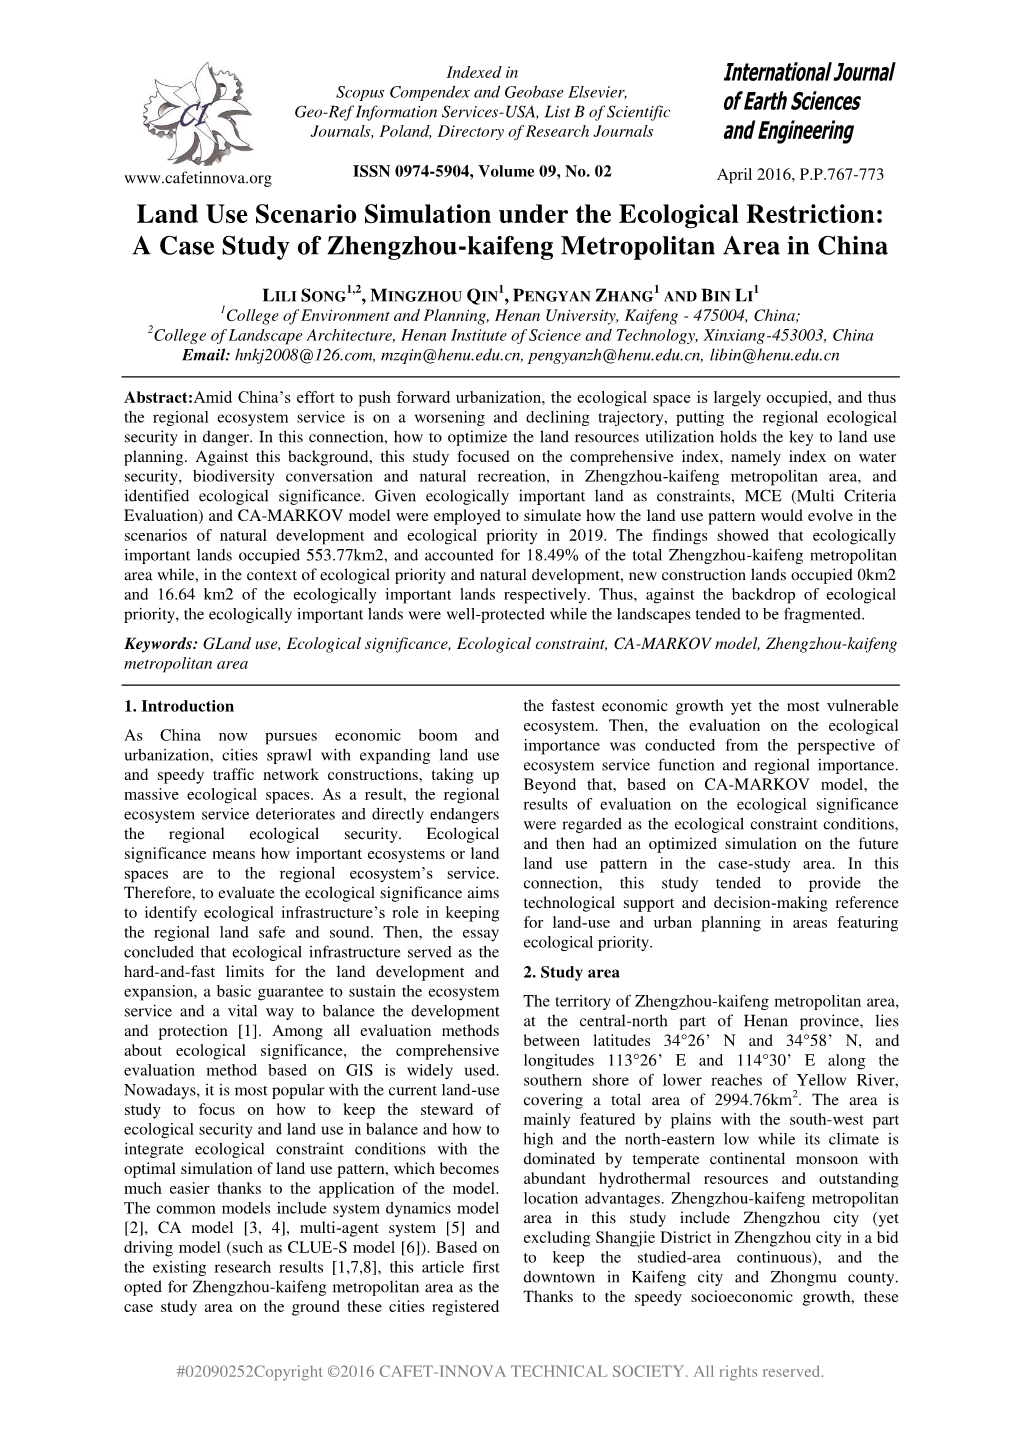 Land Use Scenario Simulation Under the Ecological Restriction: a Case Study of Zhengzhou-Kaifeng Metropolitan Area in China